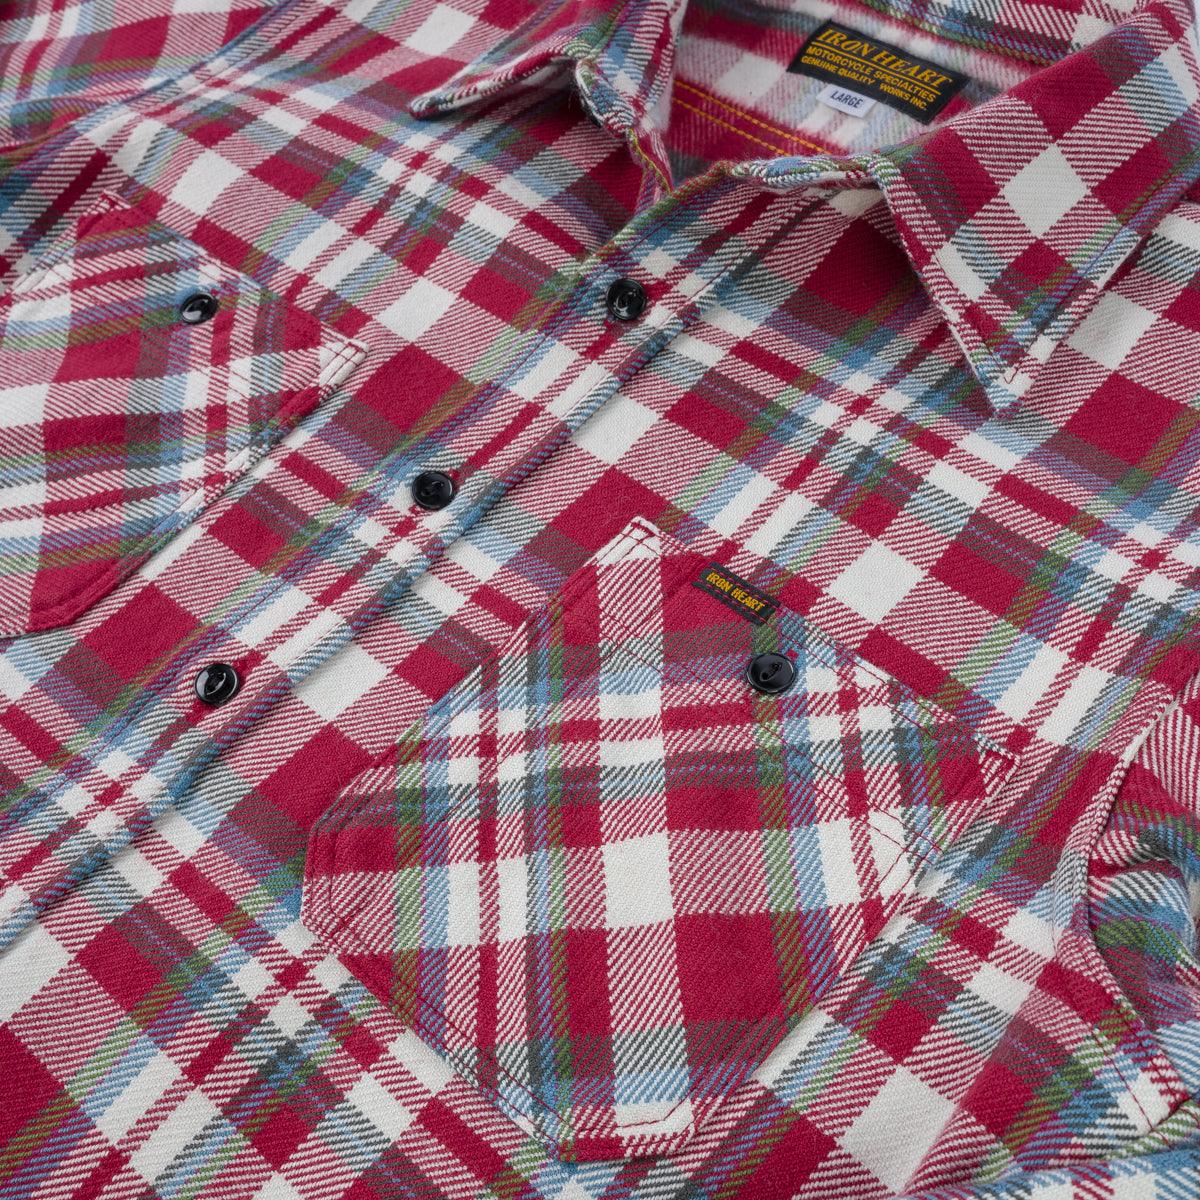 IHSH-371-RED - Ultra Heavy Flannel Crazy Check Work Shirt - Red